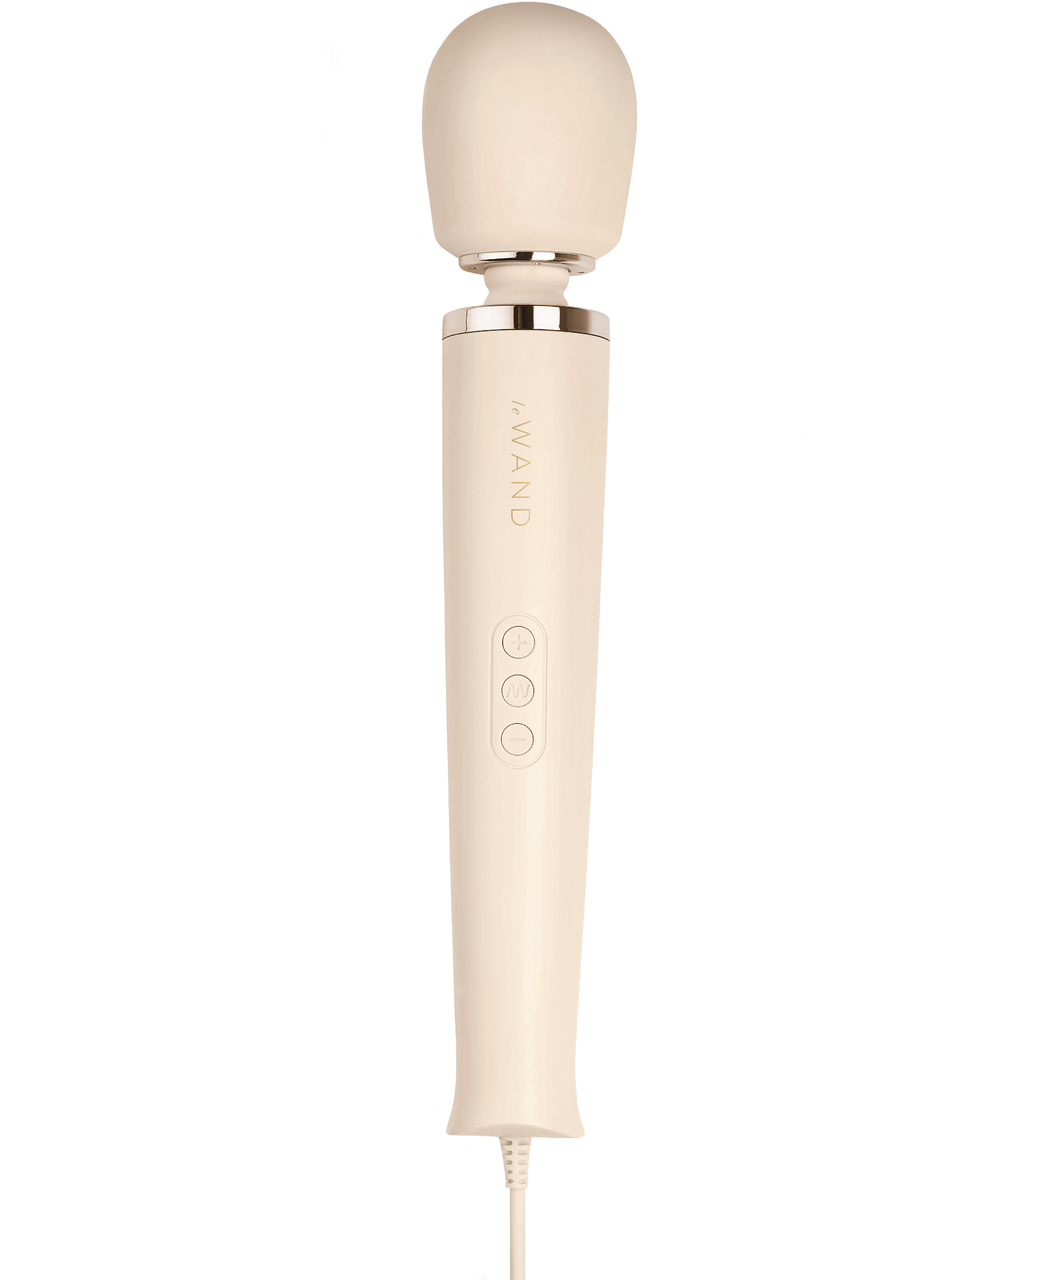 Le Wand Plug-In Vibrating Massager